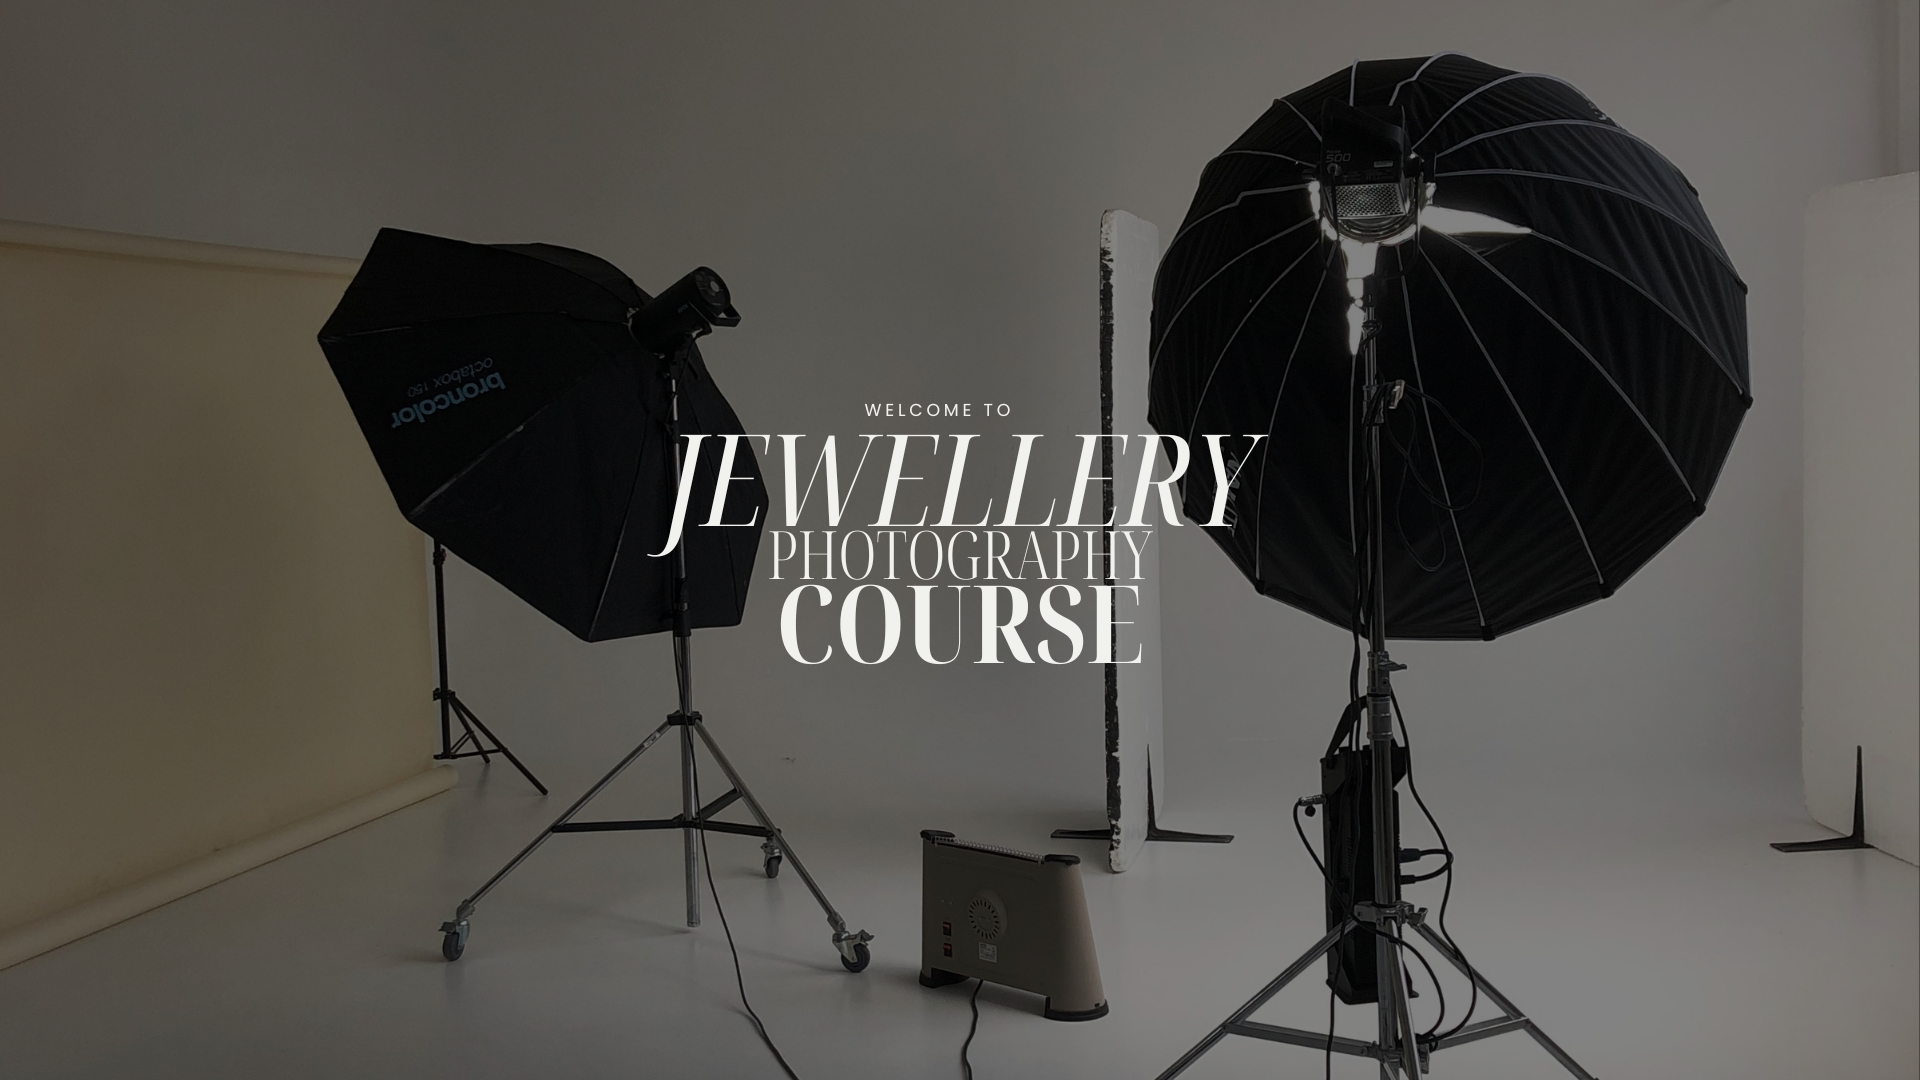 Jewellery Photography Course, How To Photograph Jewellery, Ring Photograph, Rings, Gold Jewellery, Jewellery Photoshoot, Online Jewellery Course, Jewellery Photo Course, Jewelry Photography Course